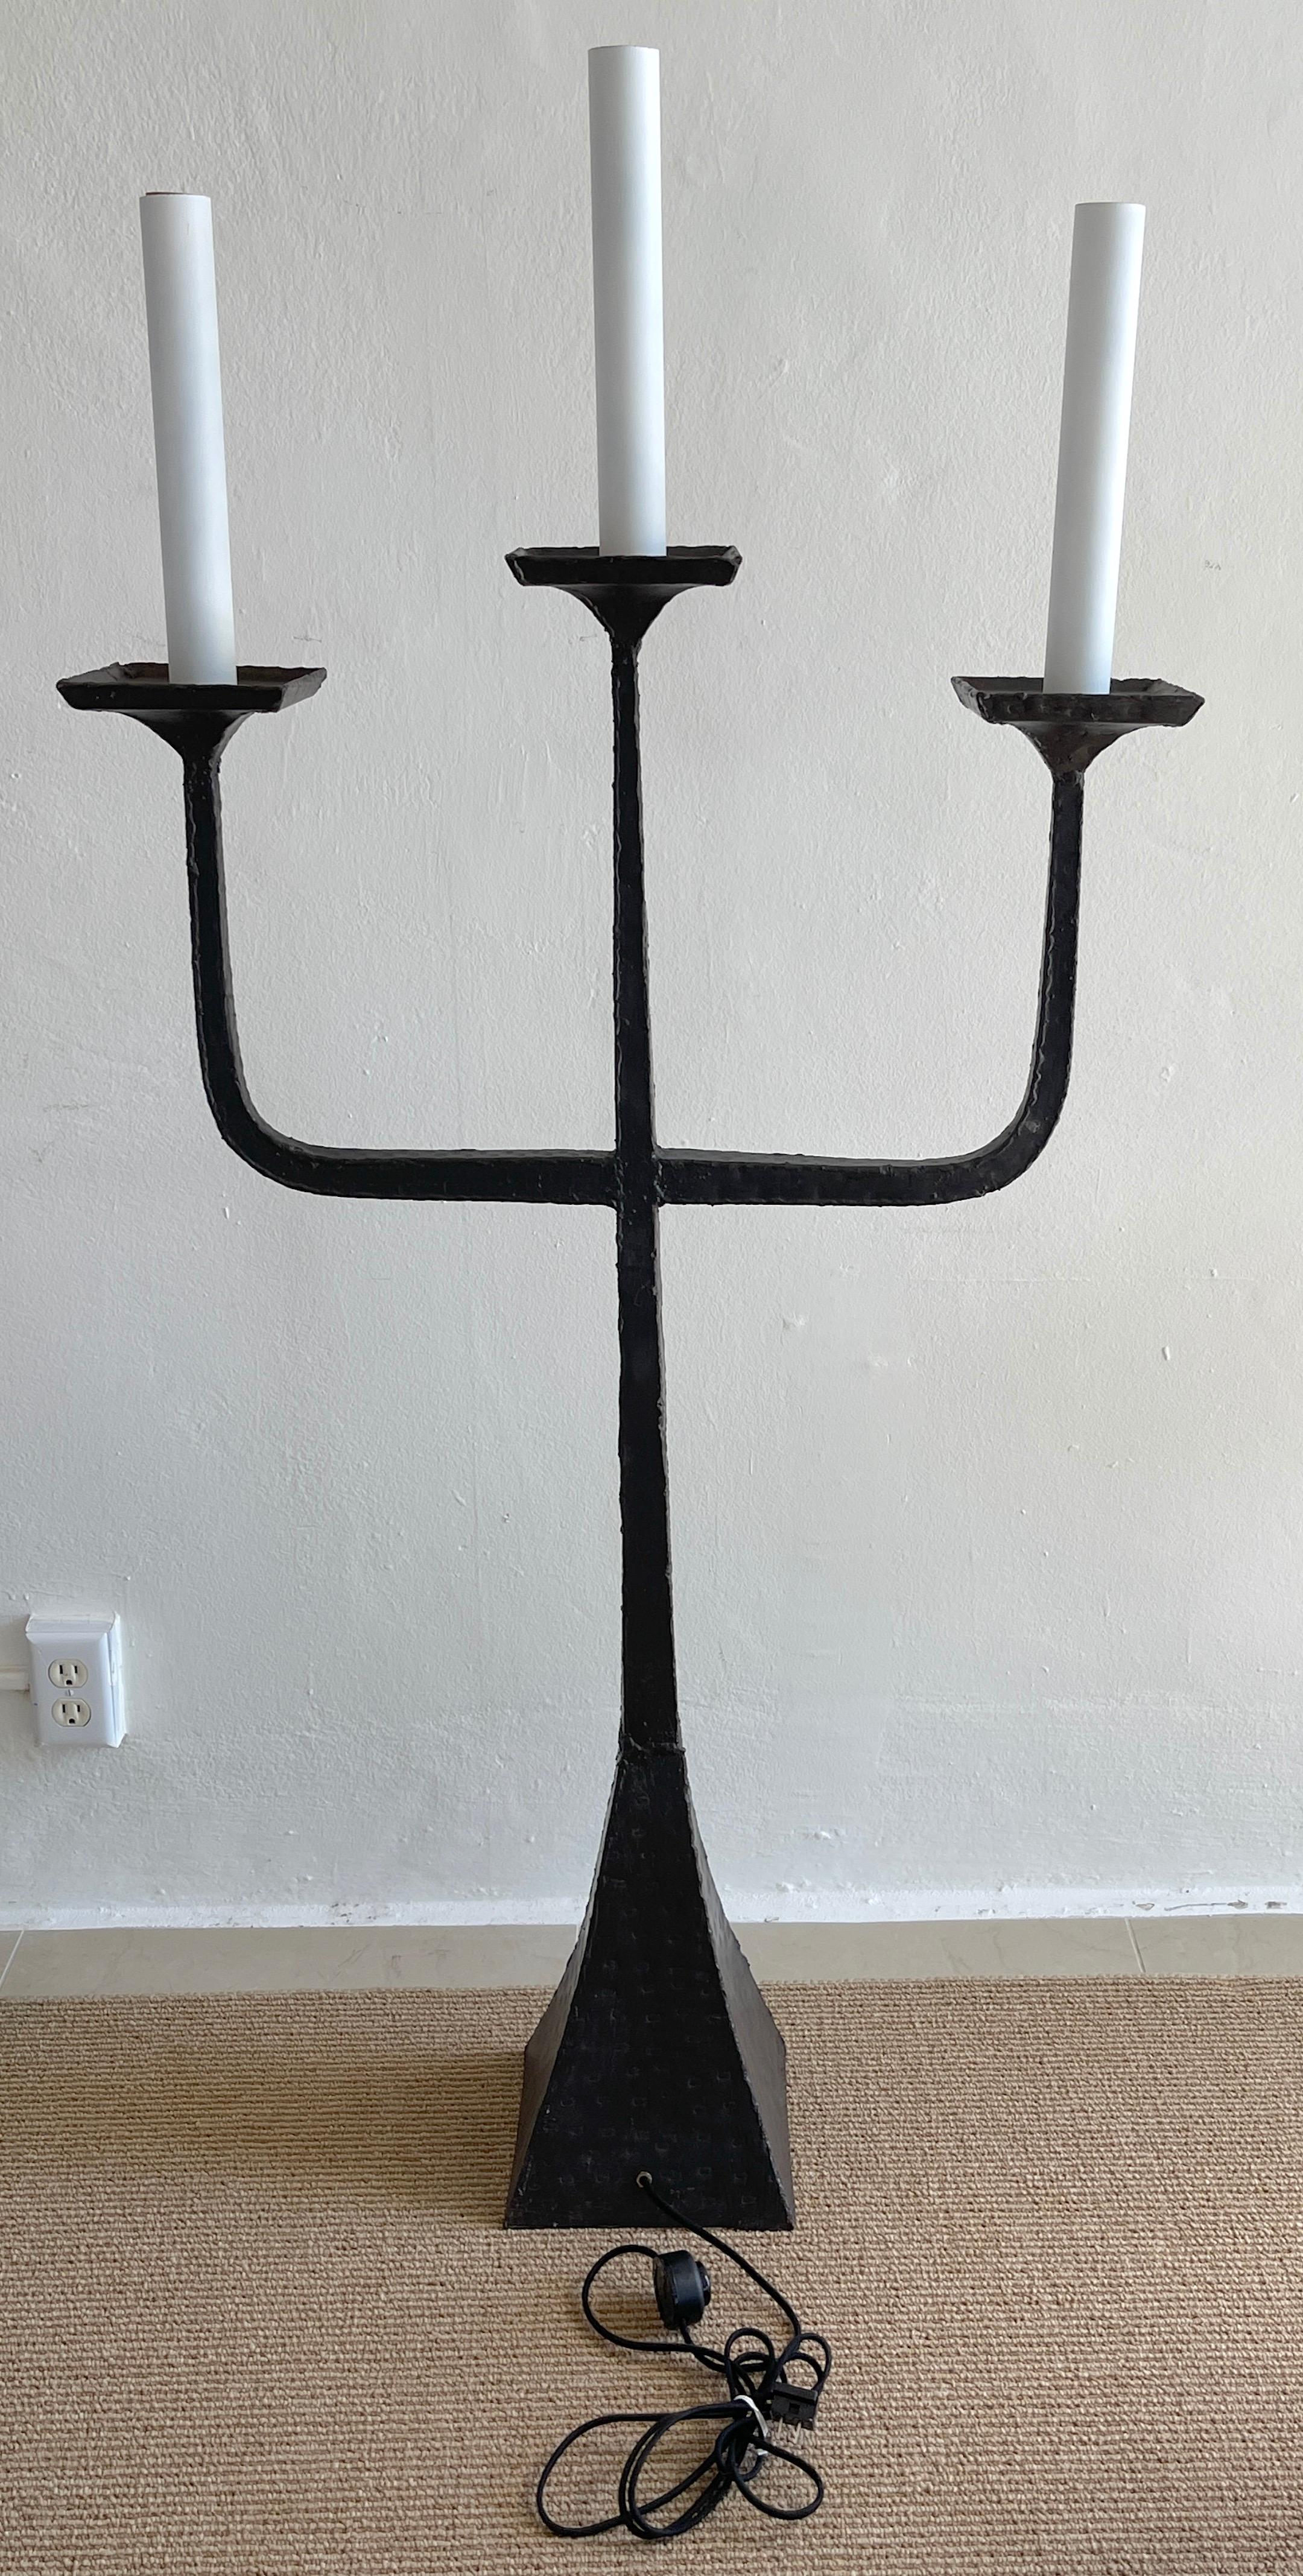 20th Century French Modern Wrought Iron Three -Light Candelabra Floor Lamp For Sale